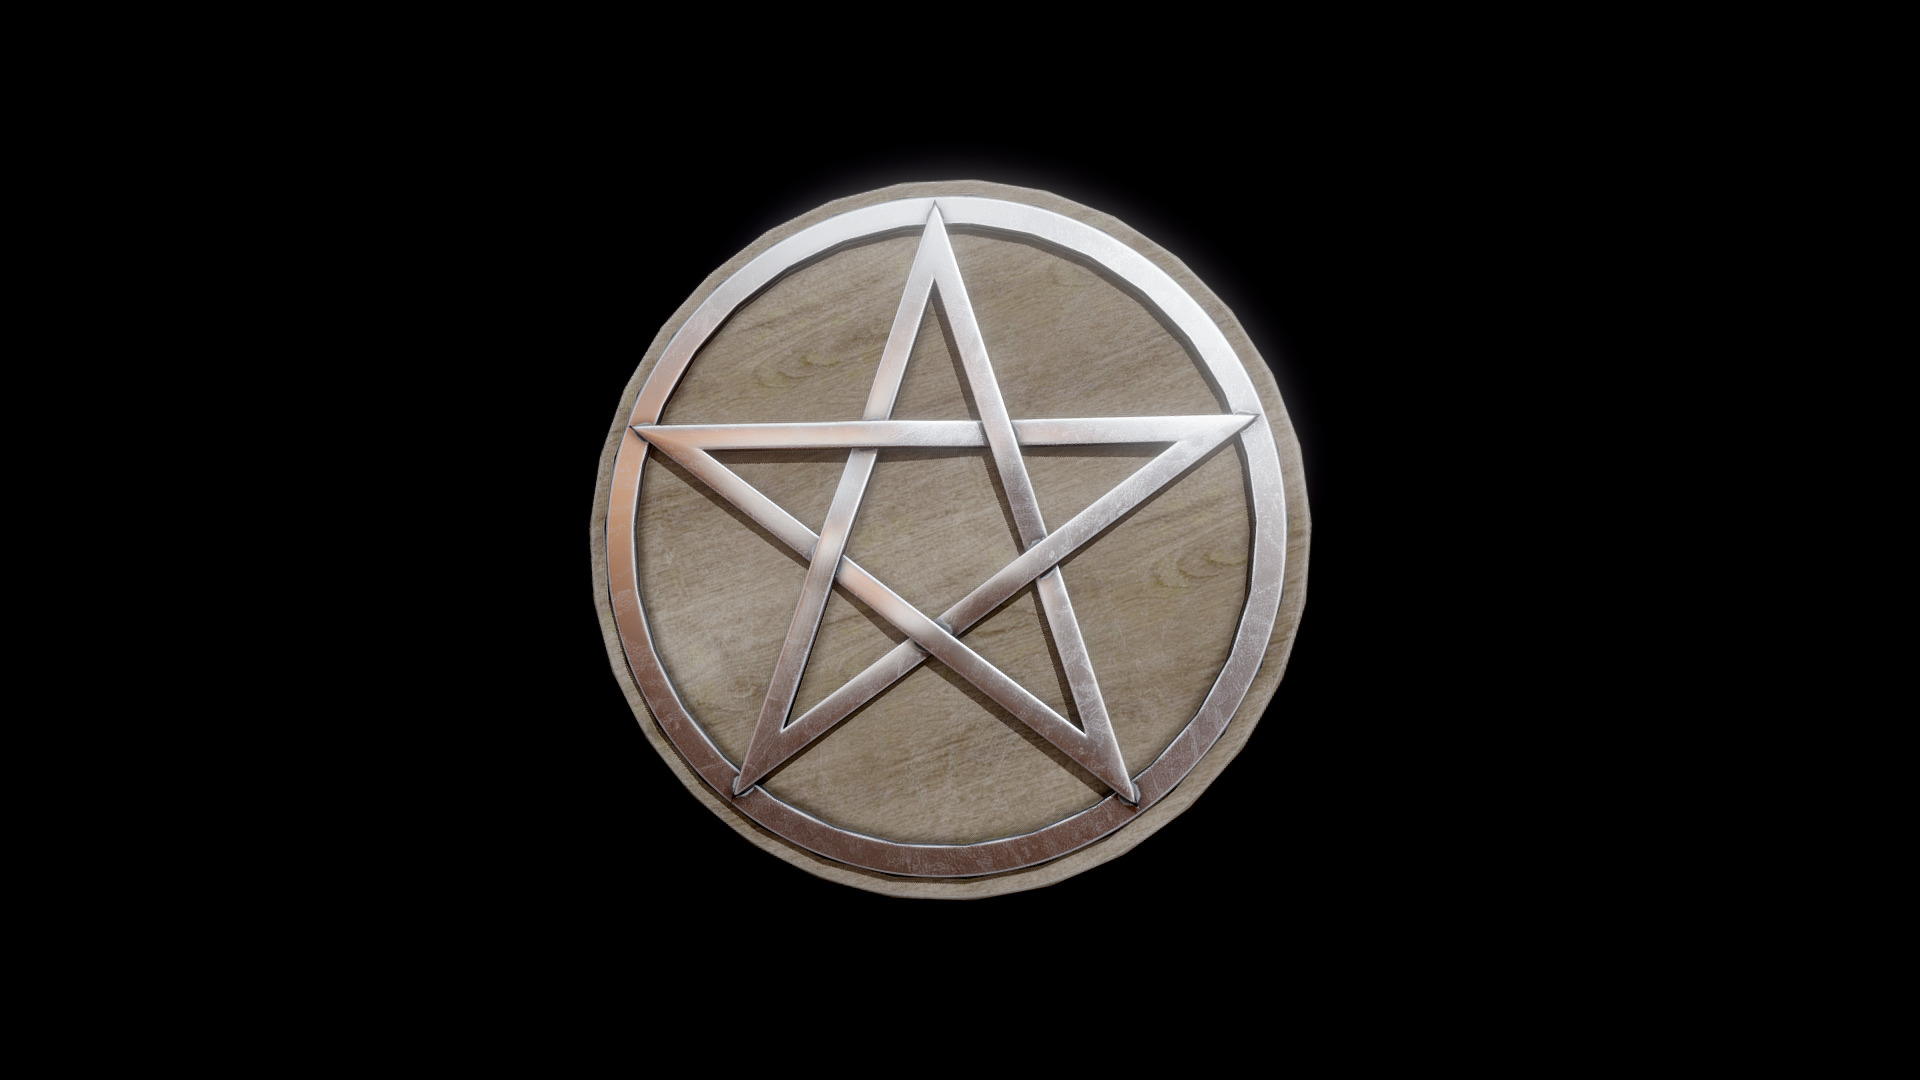 3D model Witches’ Pentacle - This is a 3D model of the Witches' Pentacle. The 3D model is about a basketball on a black background.